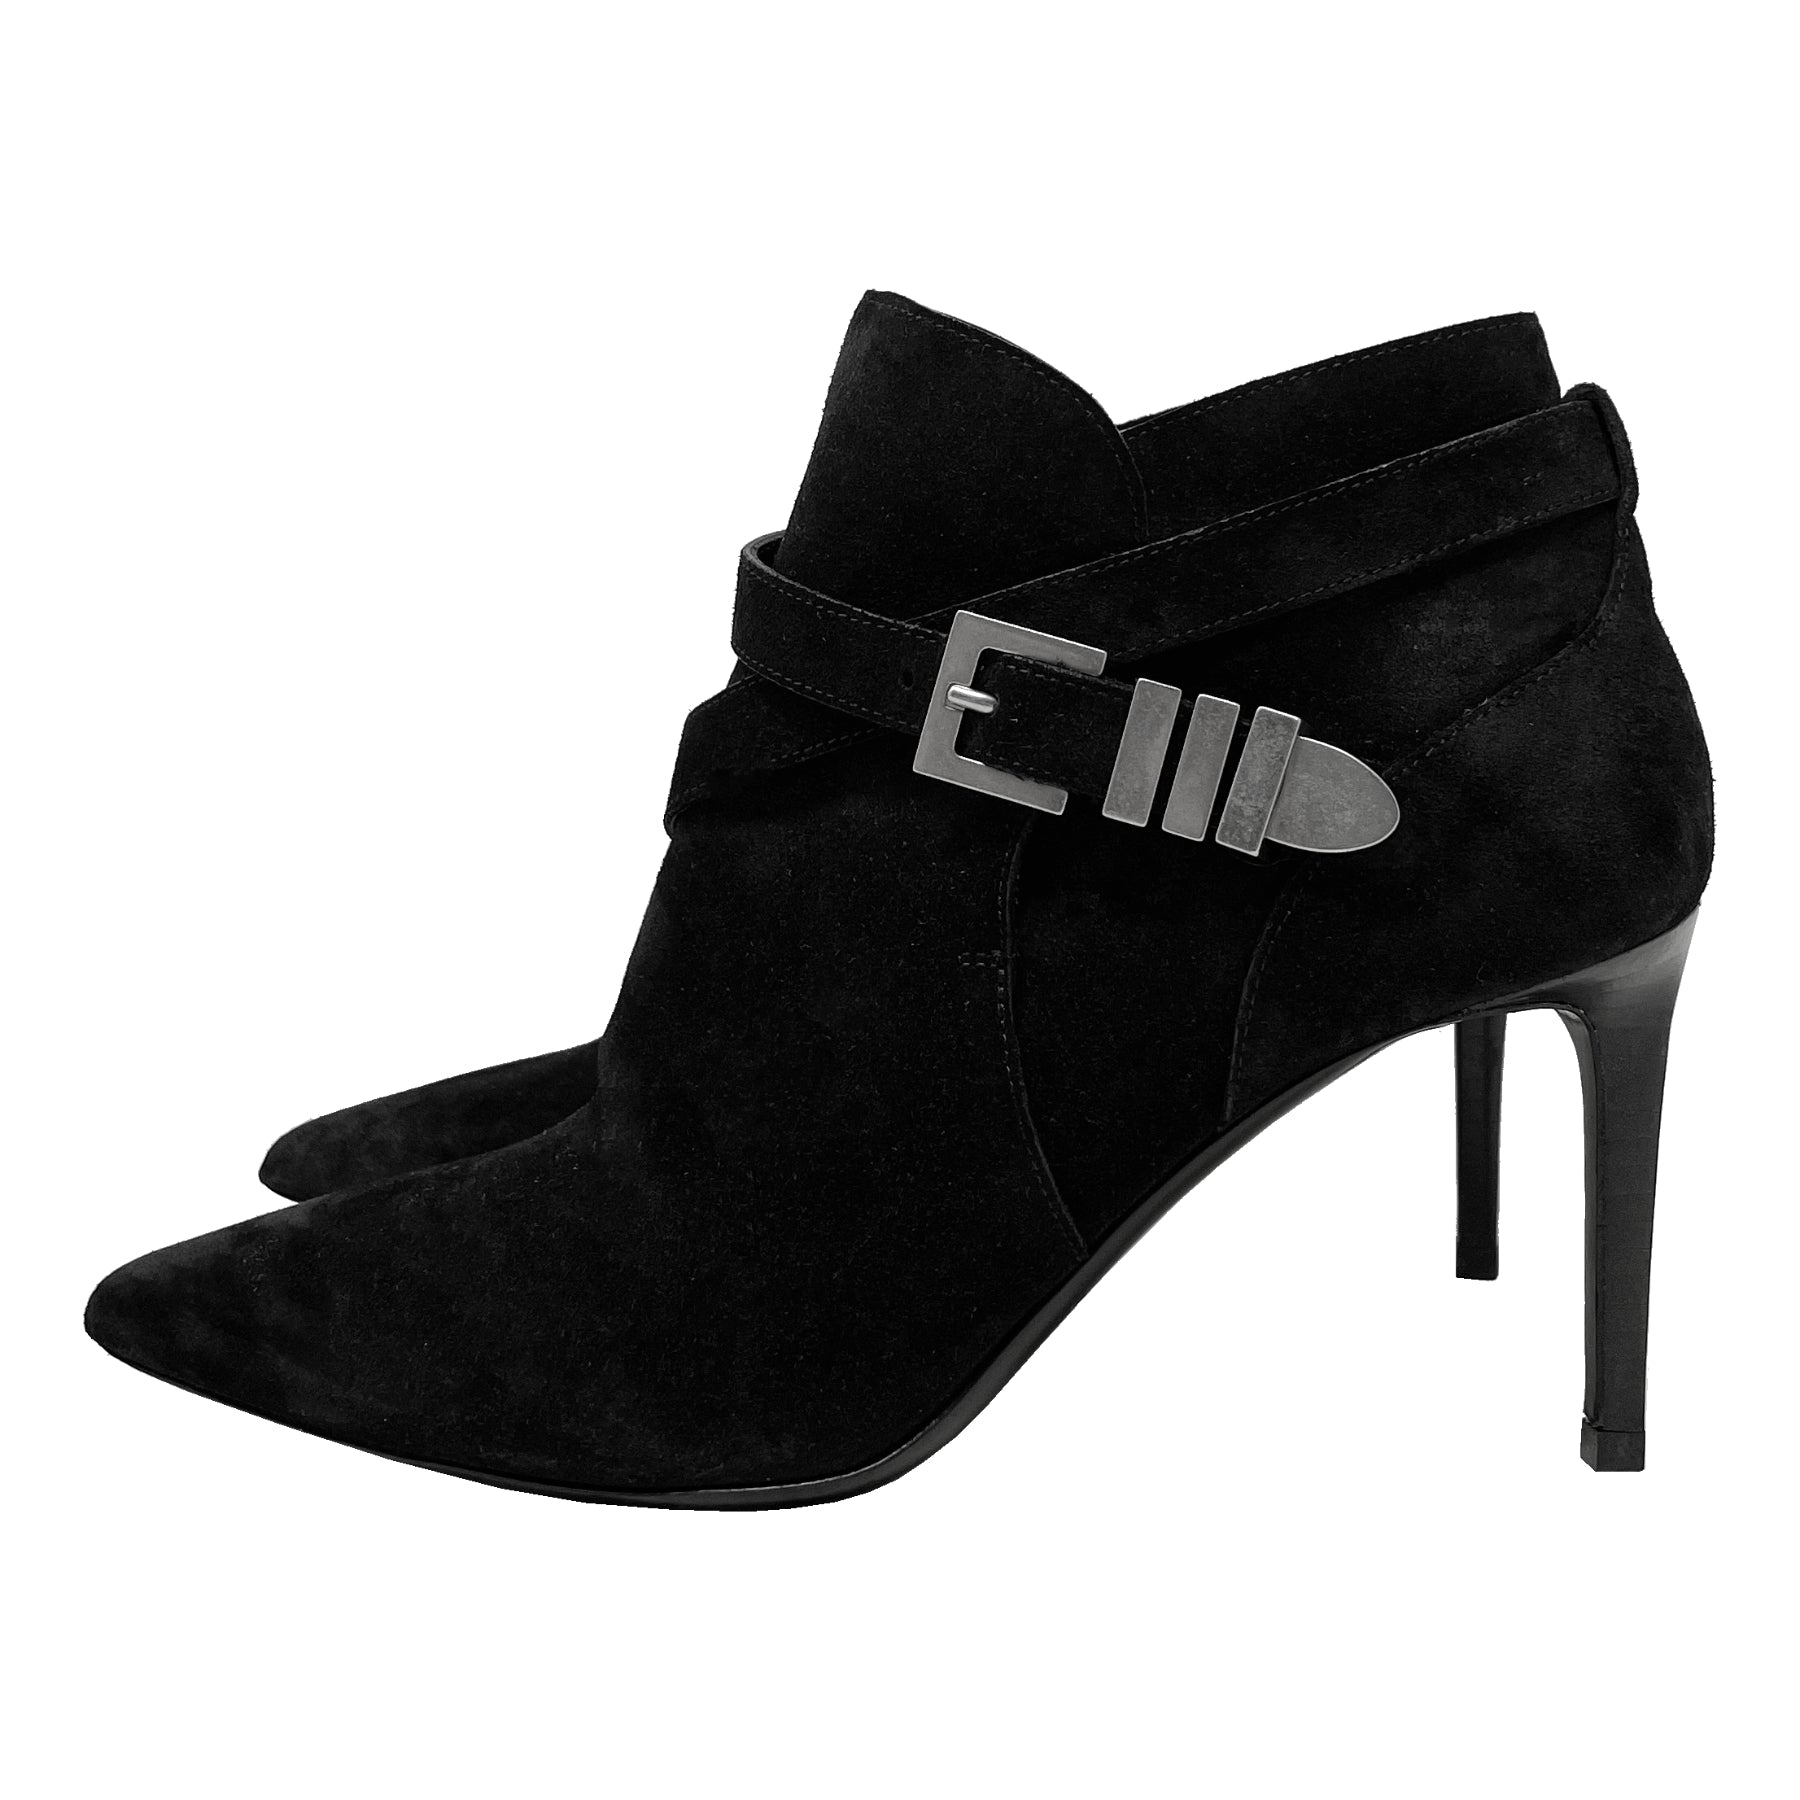 Saint Laurent Suede Pointed Buckle Toe Ankle Boots